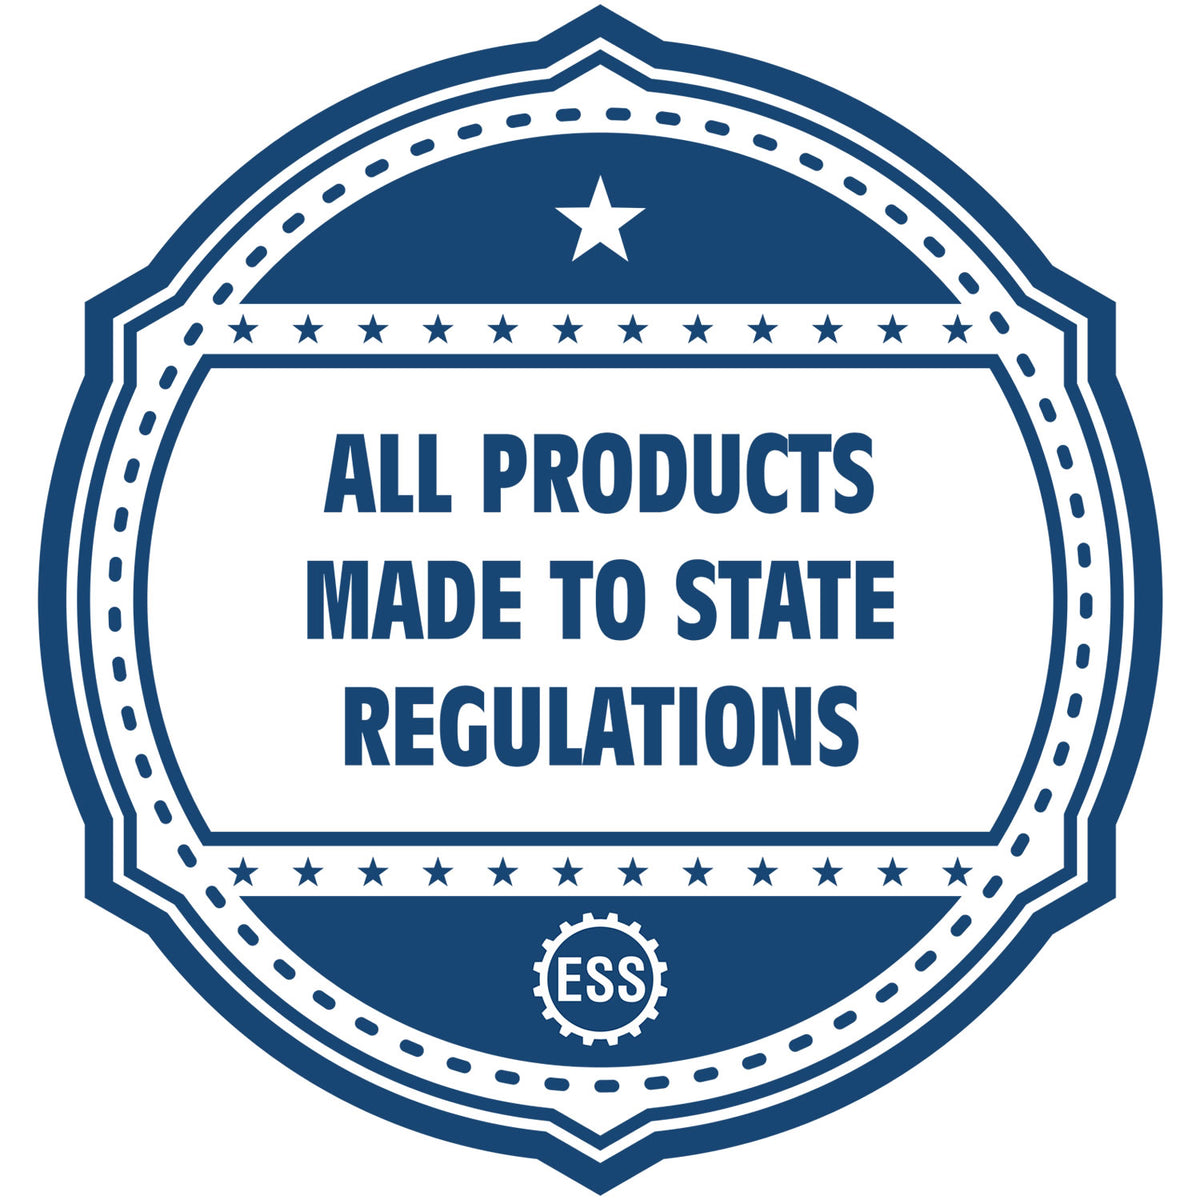 An icon or badge element for the Slim Pre-Inked New Hampshire Landscape Architect Seal Stamp showing that this product is made in compliance with state regulations.